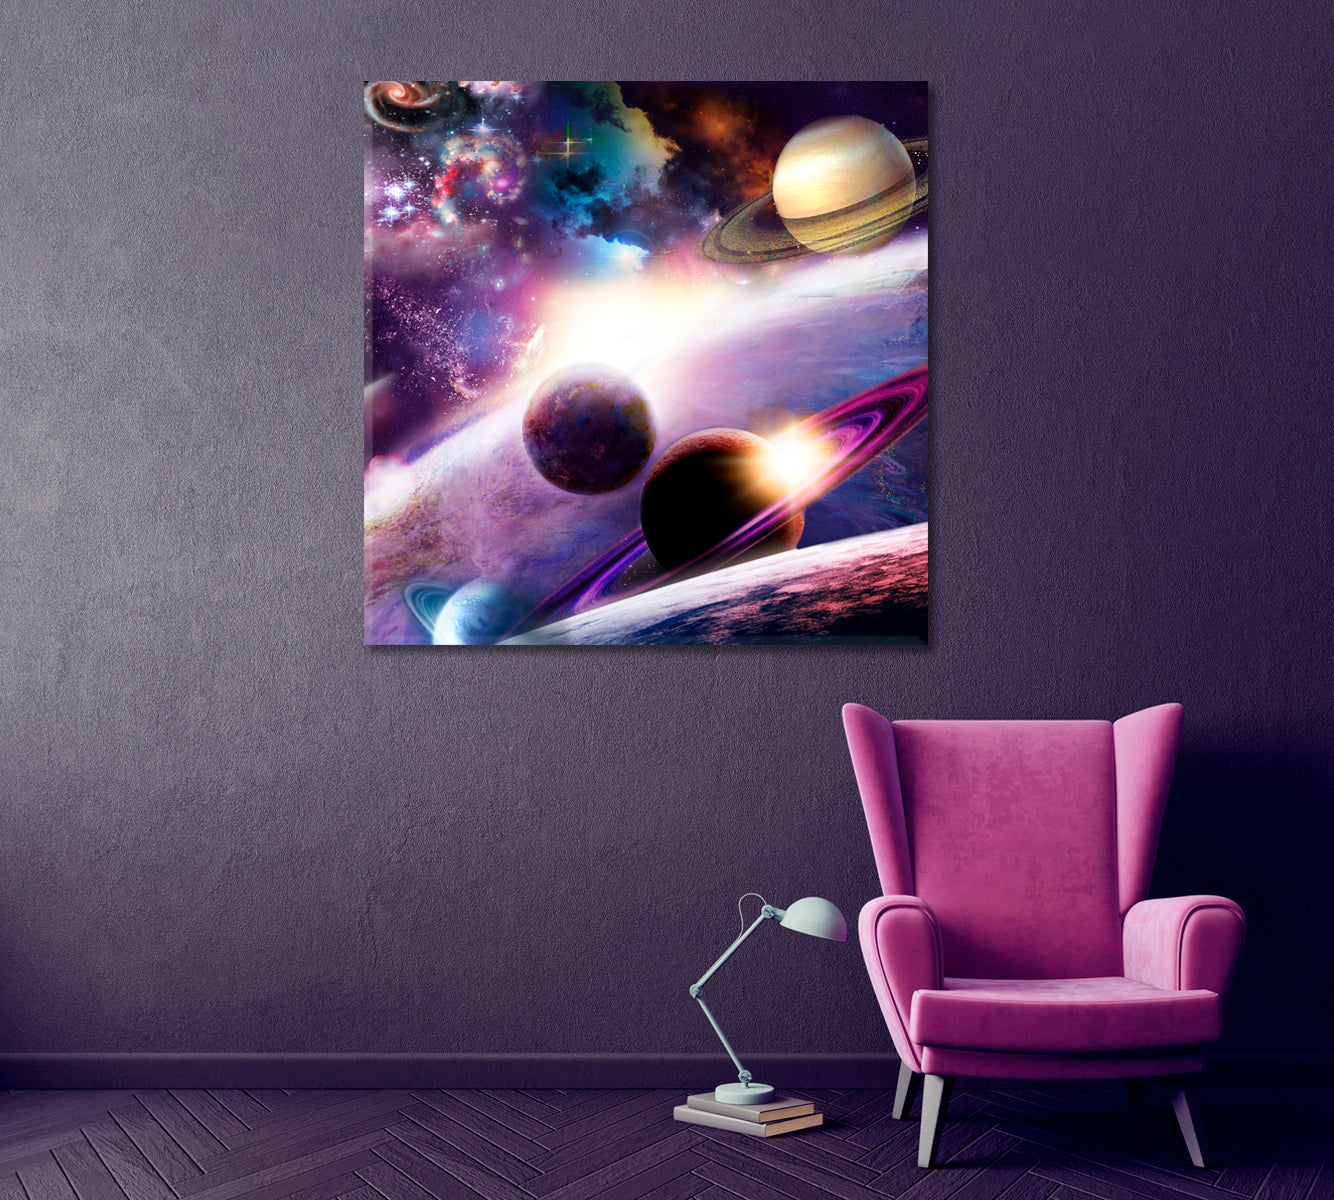 Beautiful Space with Stars and Planets Canvas Print ArtLexy 1 Panel 12"x12" inches 